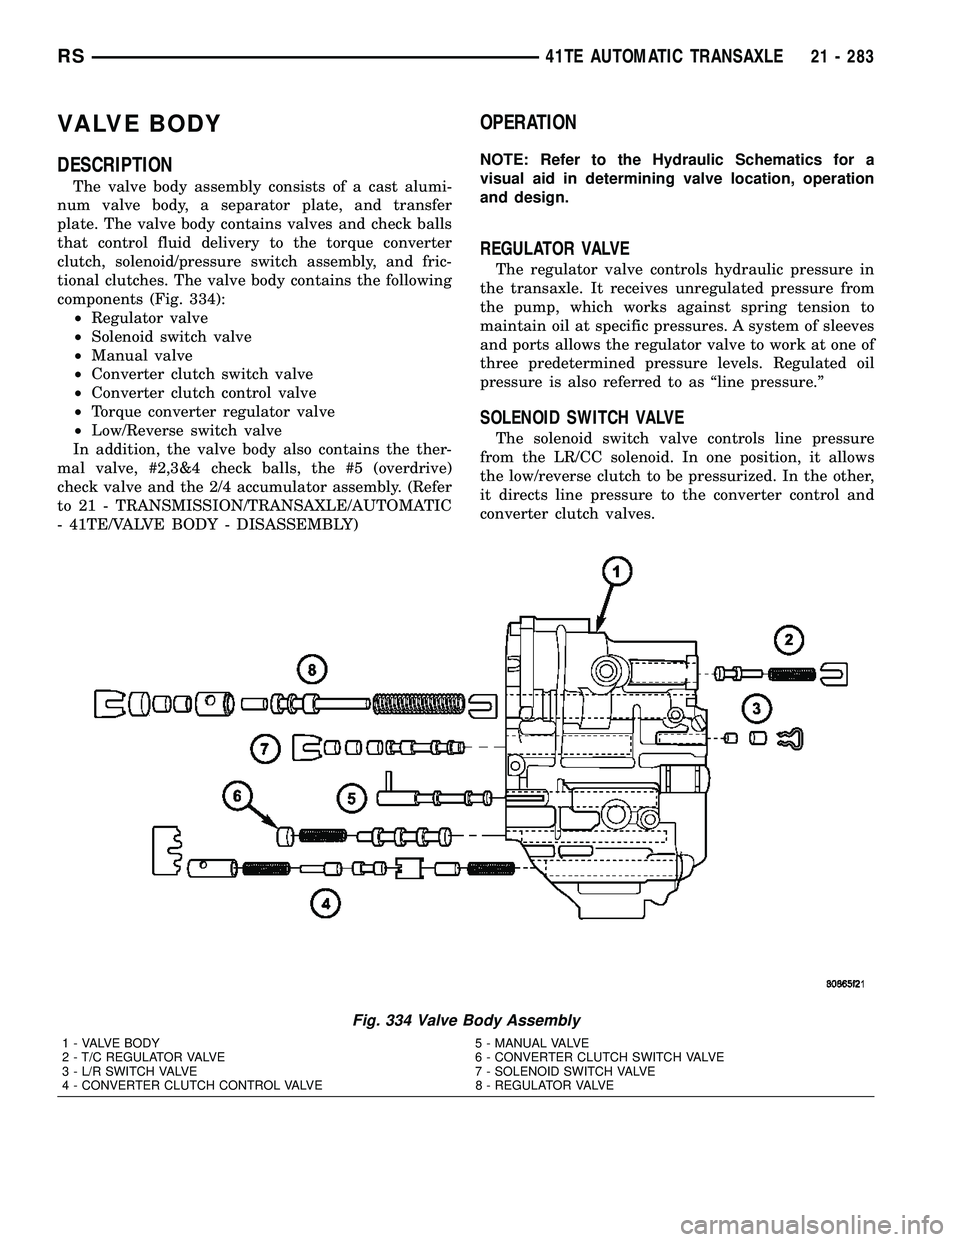 CHRYSLER VOYAGER 2005  Service Manual VALVE BODY
DESCRIPTION
The valve body assembly consists of a cast alumi-
num valve body, a separator plate, and transfer
plate. The valve body contains valves and check balls
that control fluid delive